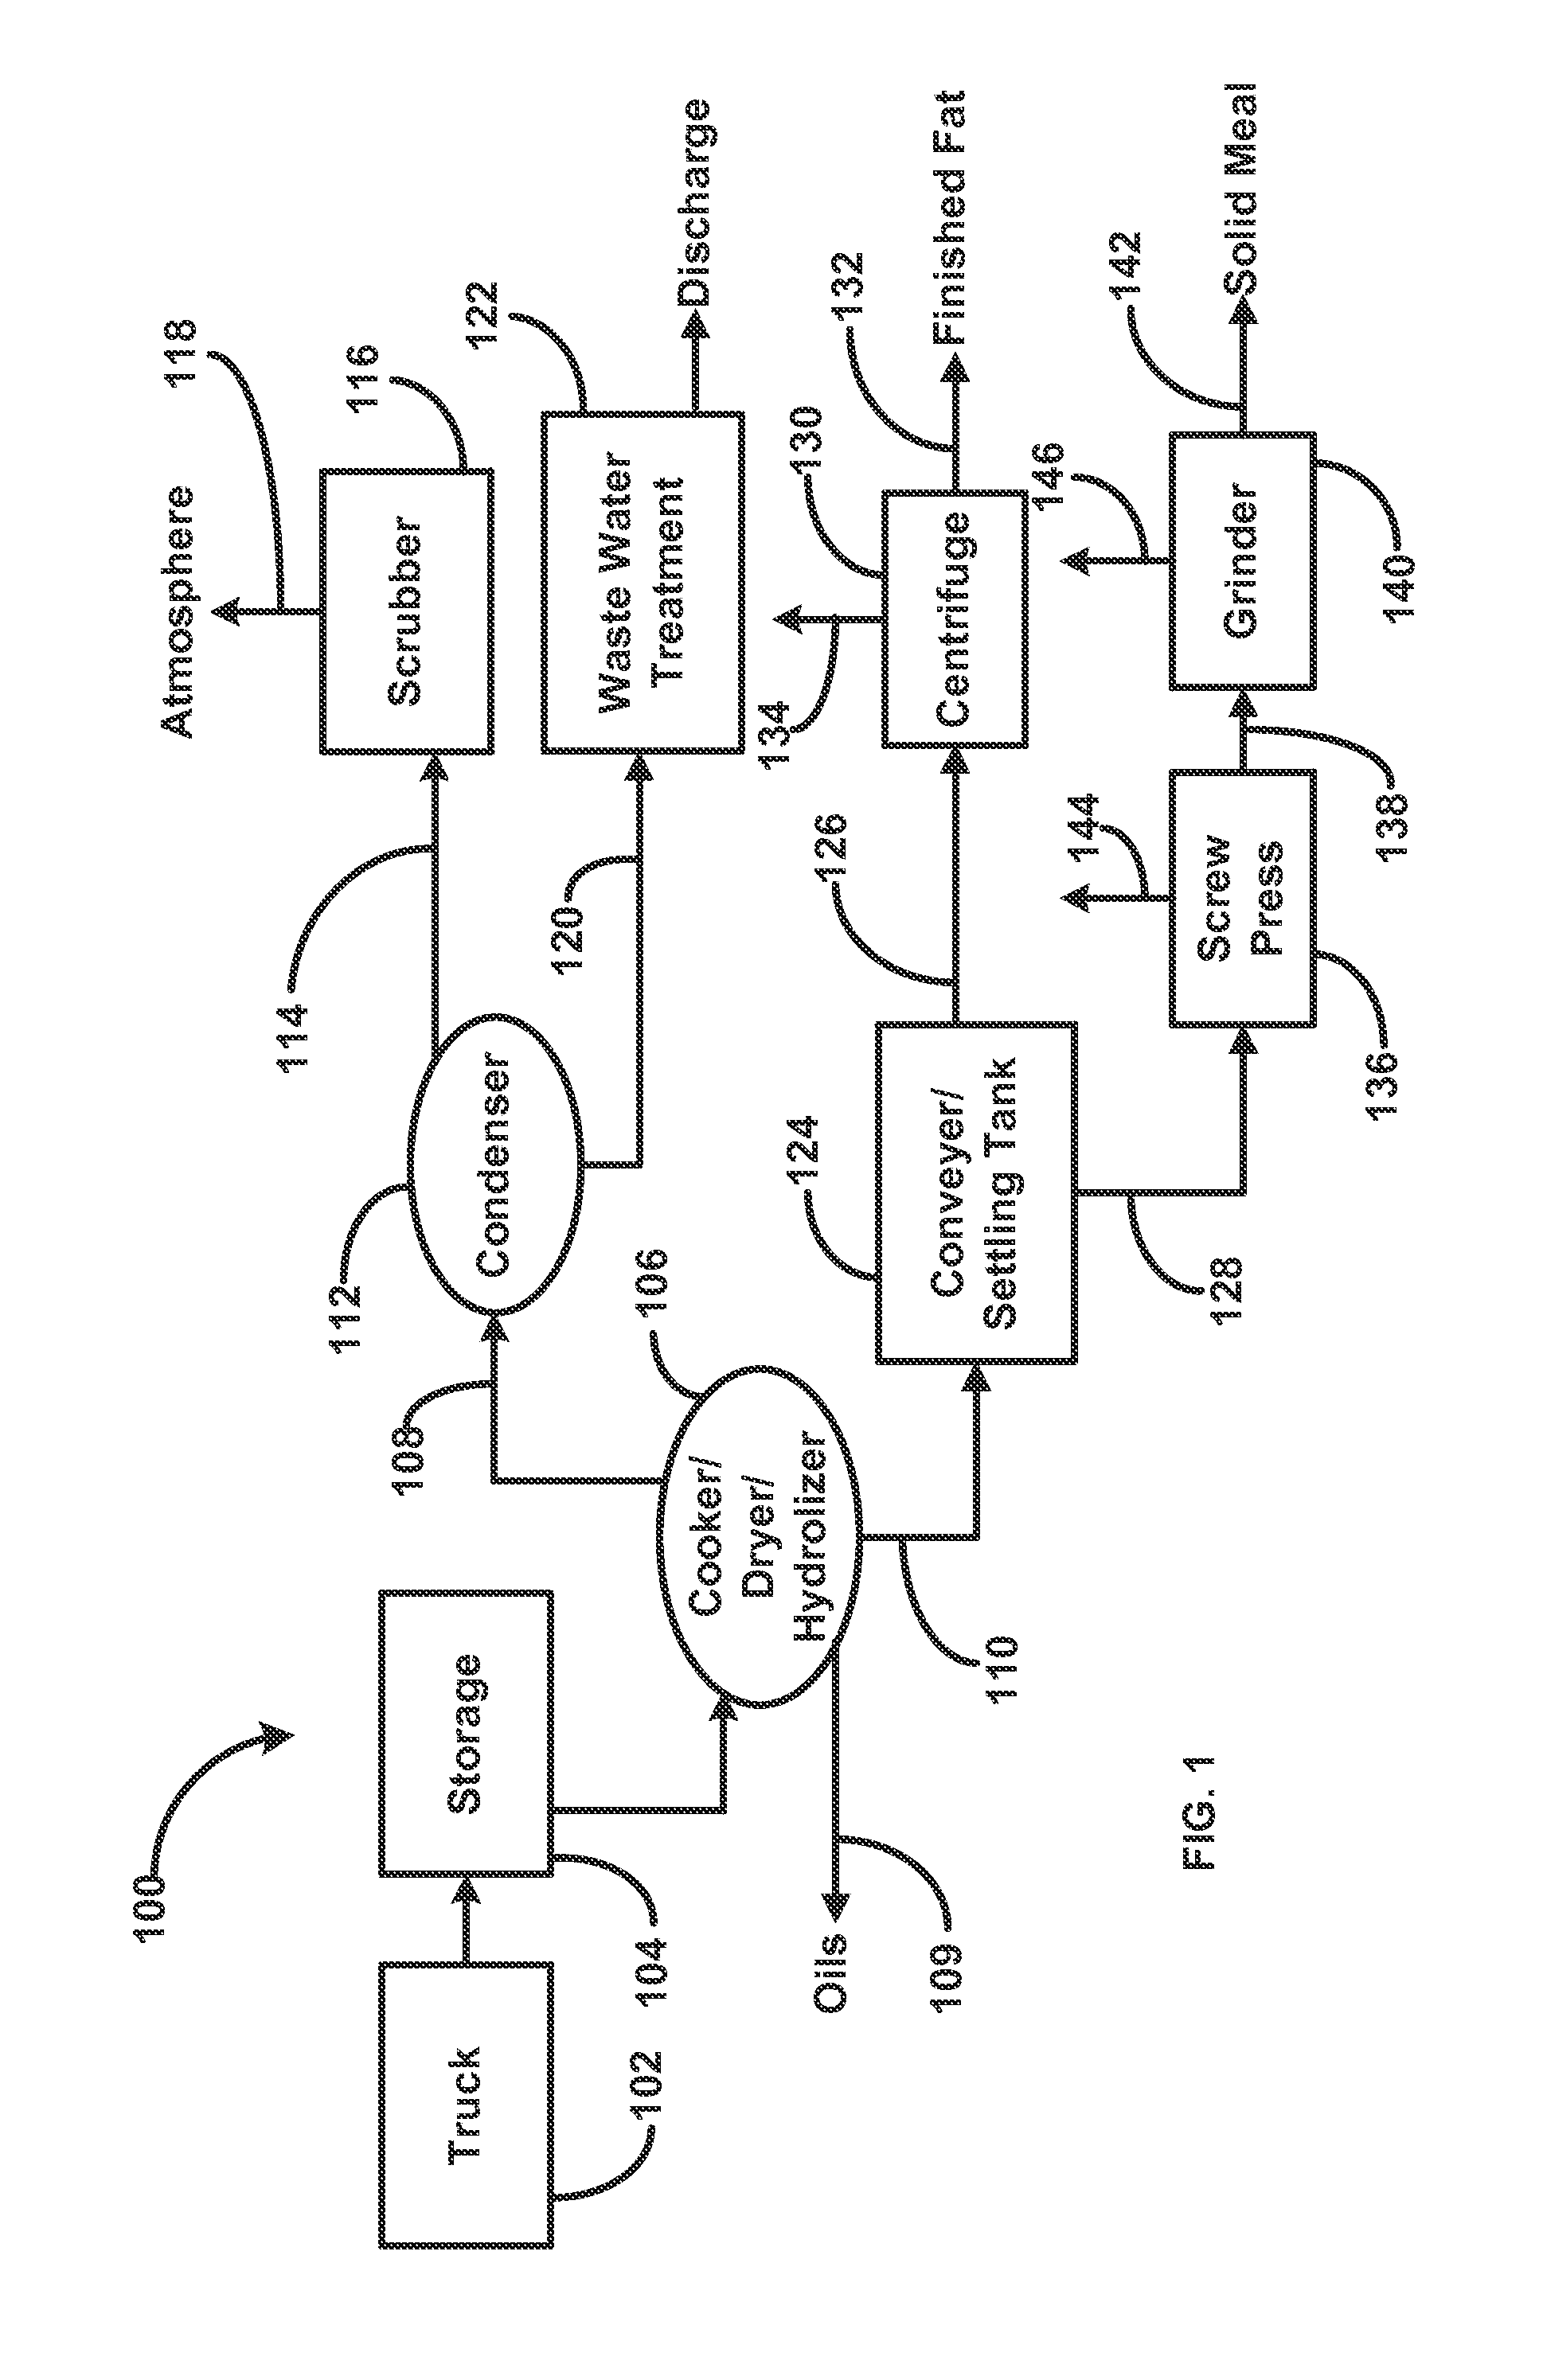 Methods and Equipment for Treatment of Odorous Gas Steams